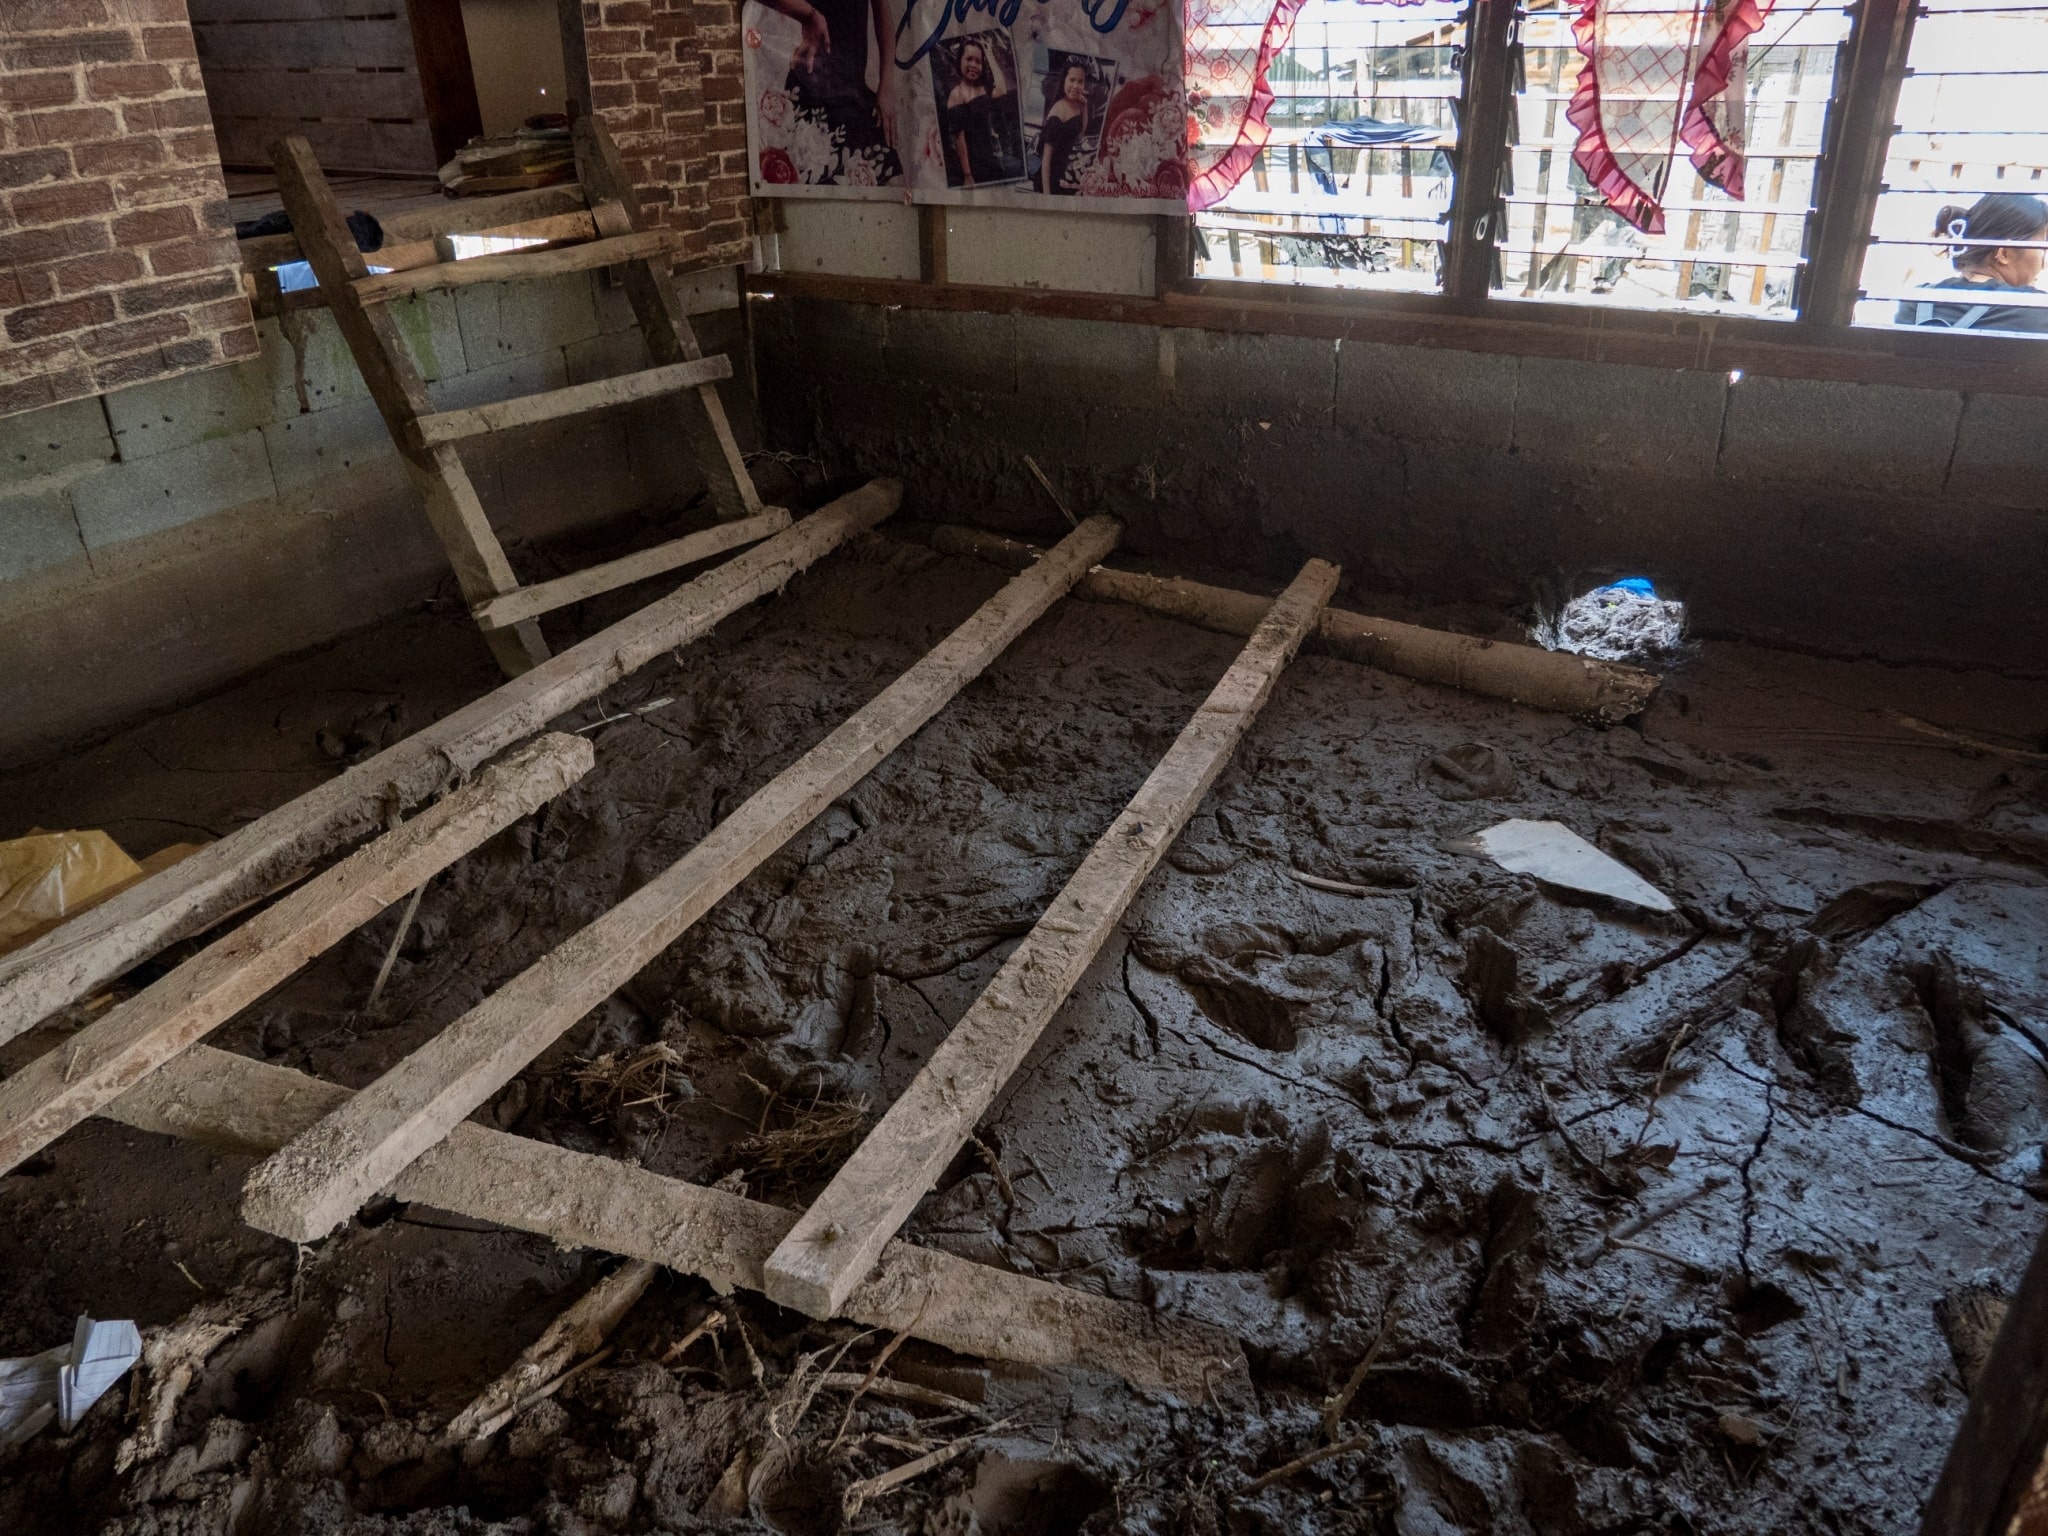 Though not completely destroyed, Chonalyn’s house is now practically uninhabitable after floods and muds reaching chest level wrecked all their belongings inside. 【Photo by Harold Alzaga】